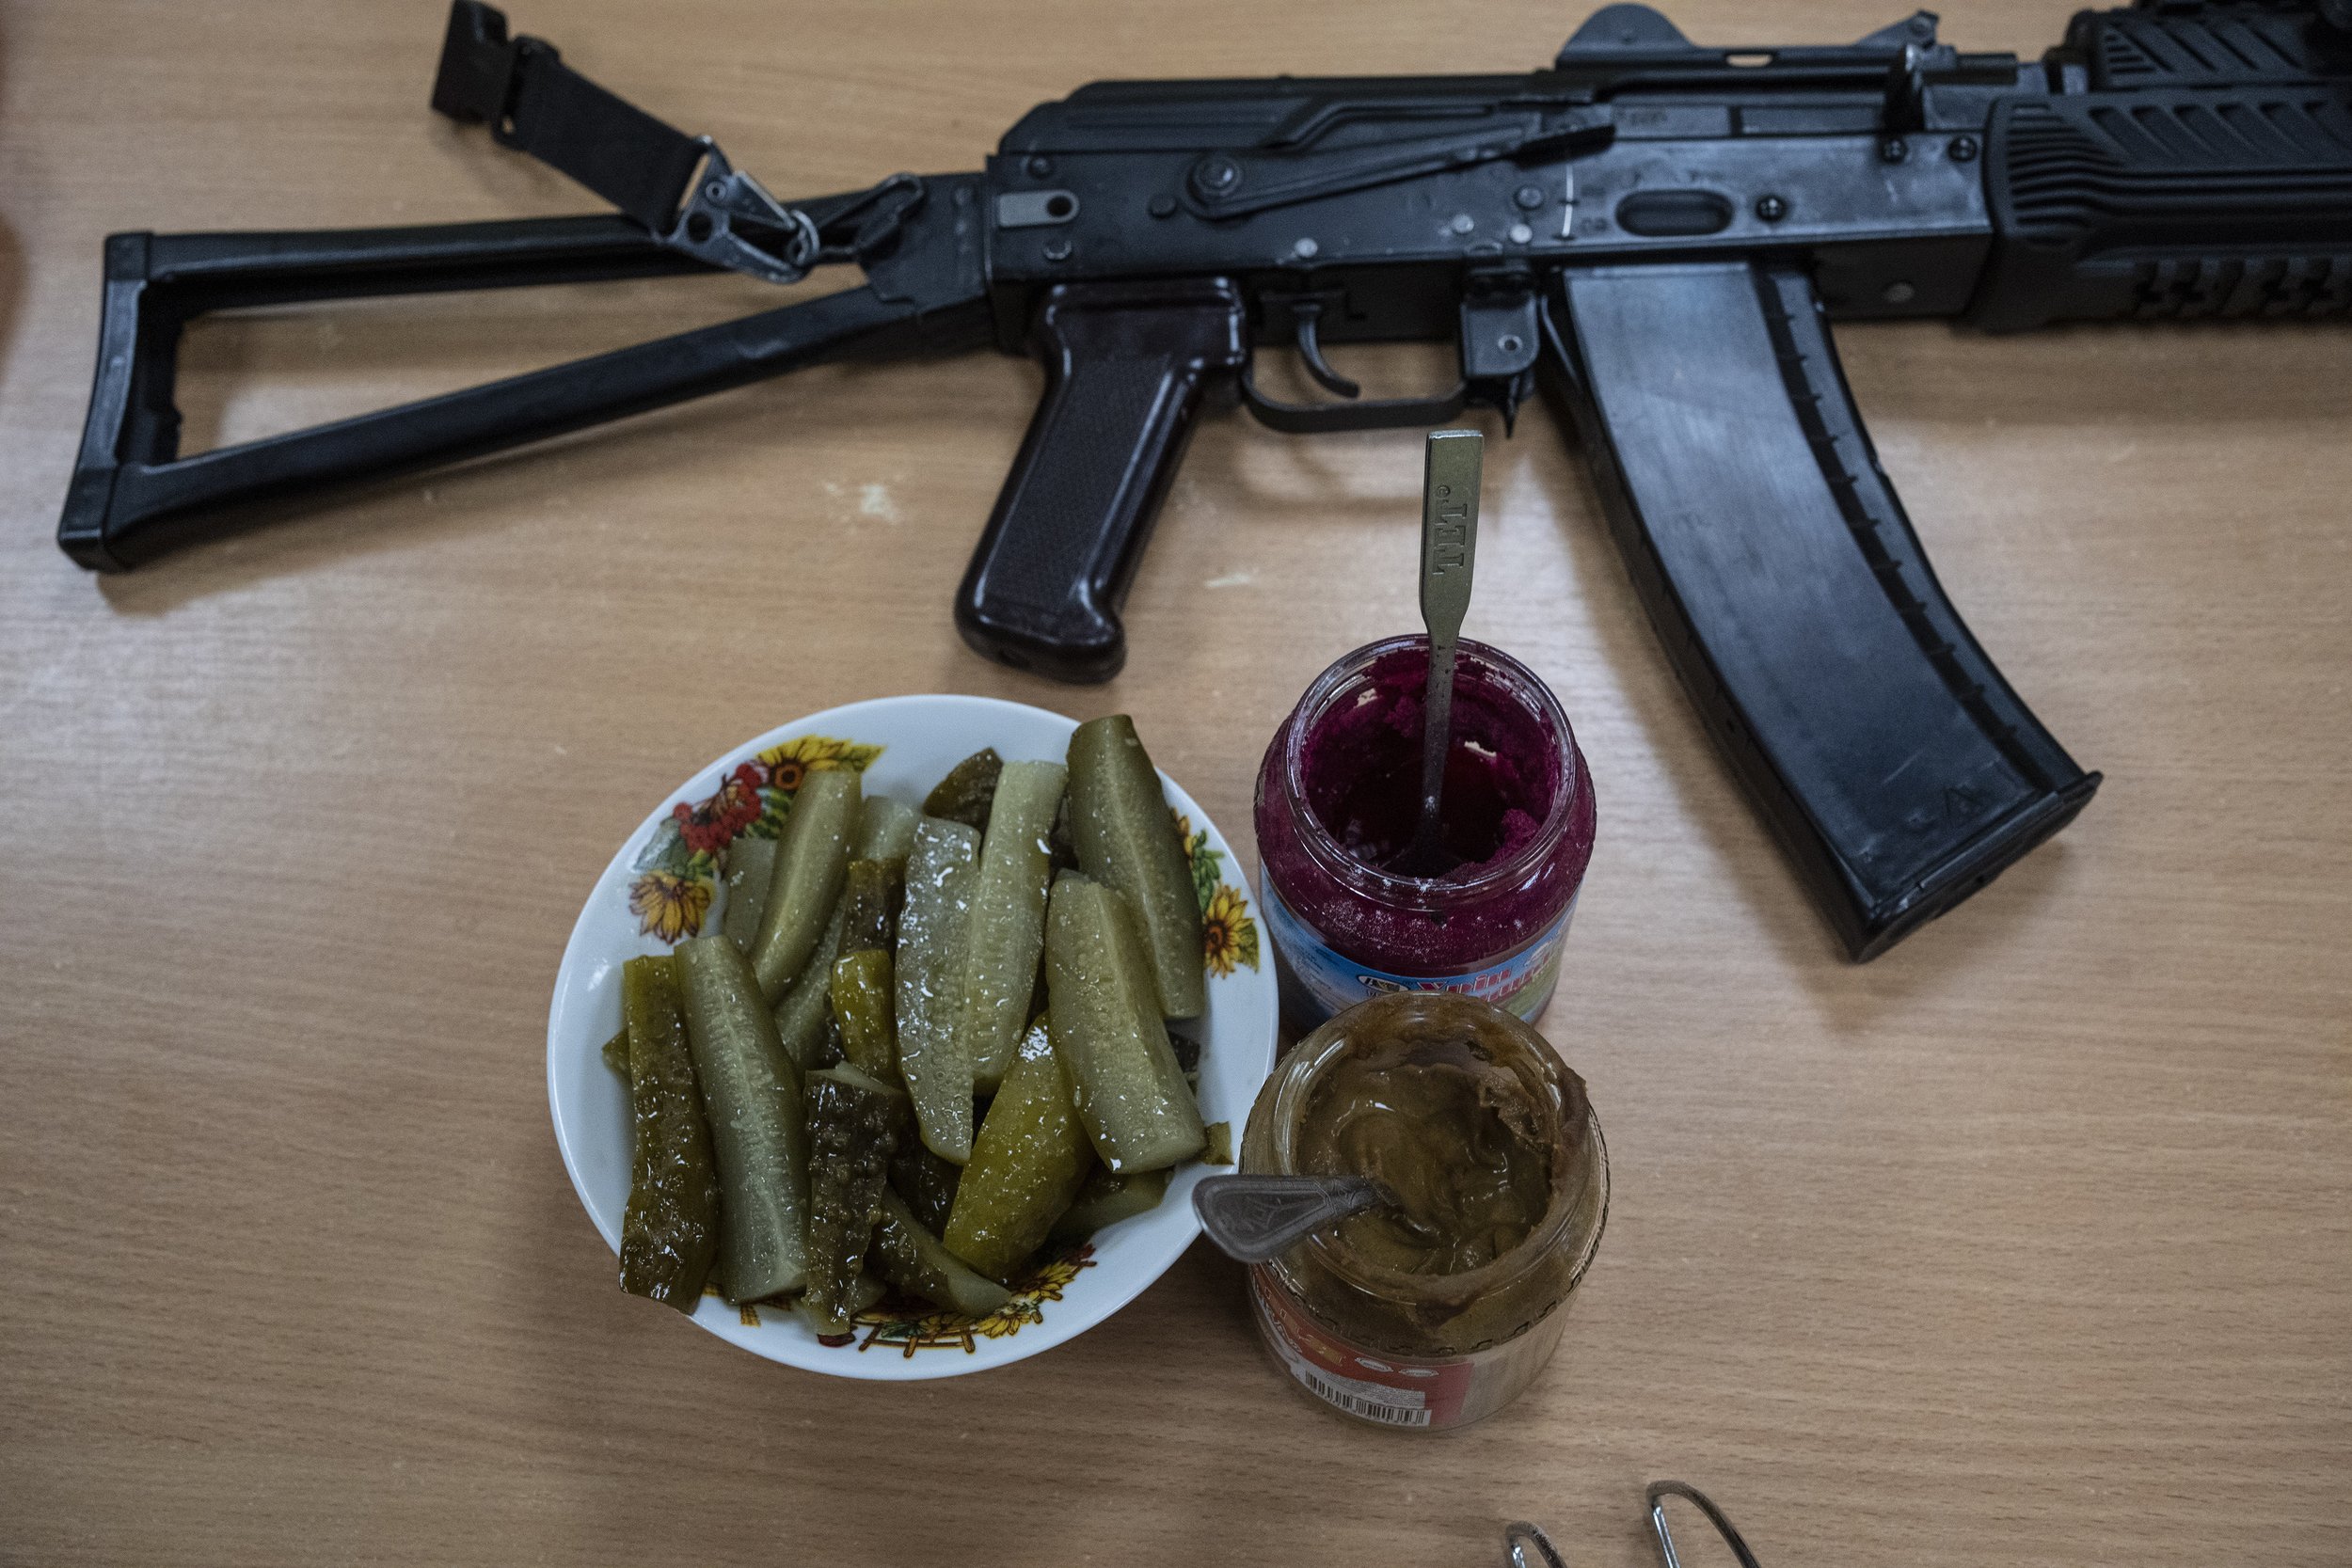  A machine gun of a Ukrainian soldier rests next to condiments for lunch in the outskirts of Kyiv, Ukraine, Thursday, March 31, 2022. (AP Photo/Rodrigo Abd) 